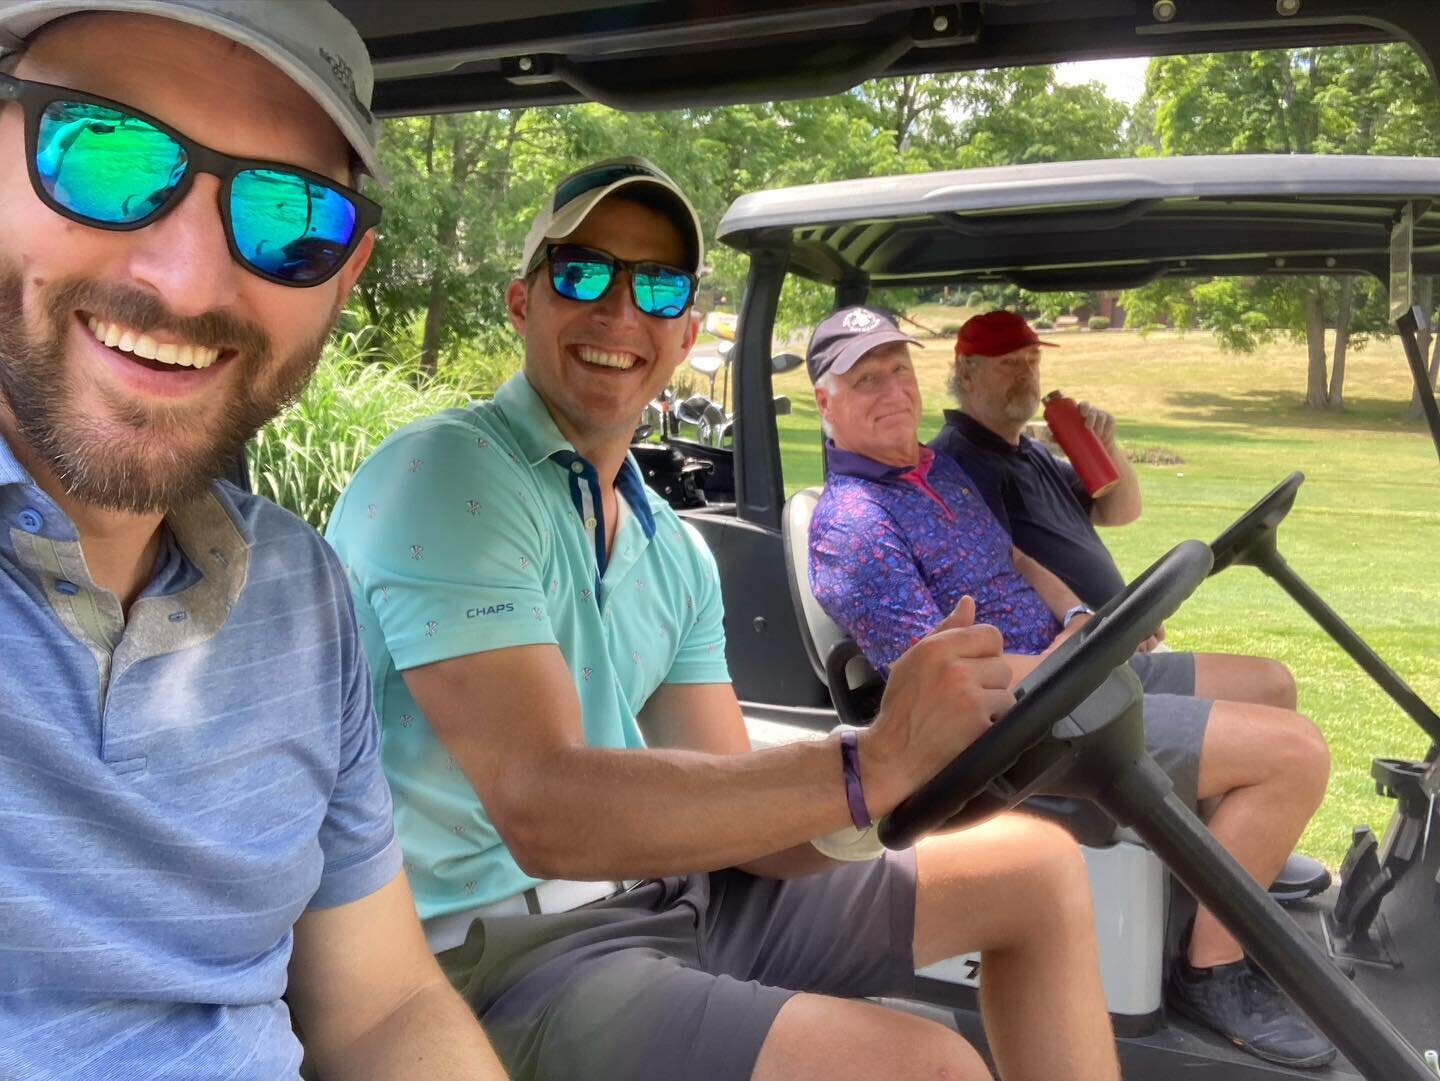 Work hard, play harder sports. Nothing like a day out on the course with the team. 

#sefcikprod #eventproduction #videoproduction #creativeservices  #njproducer